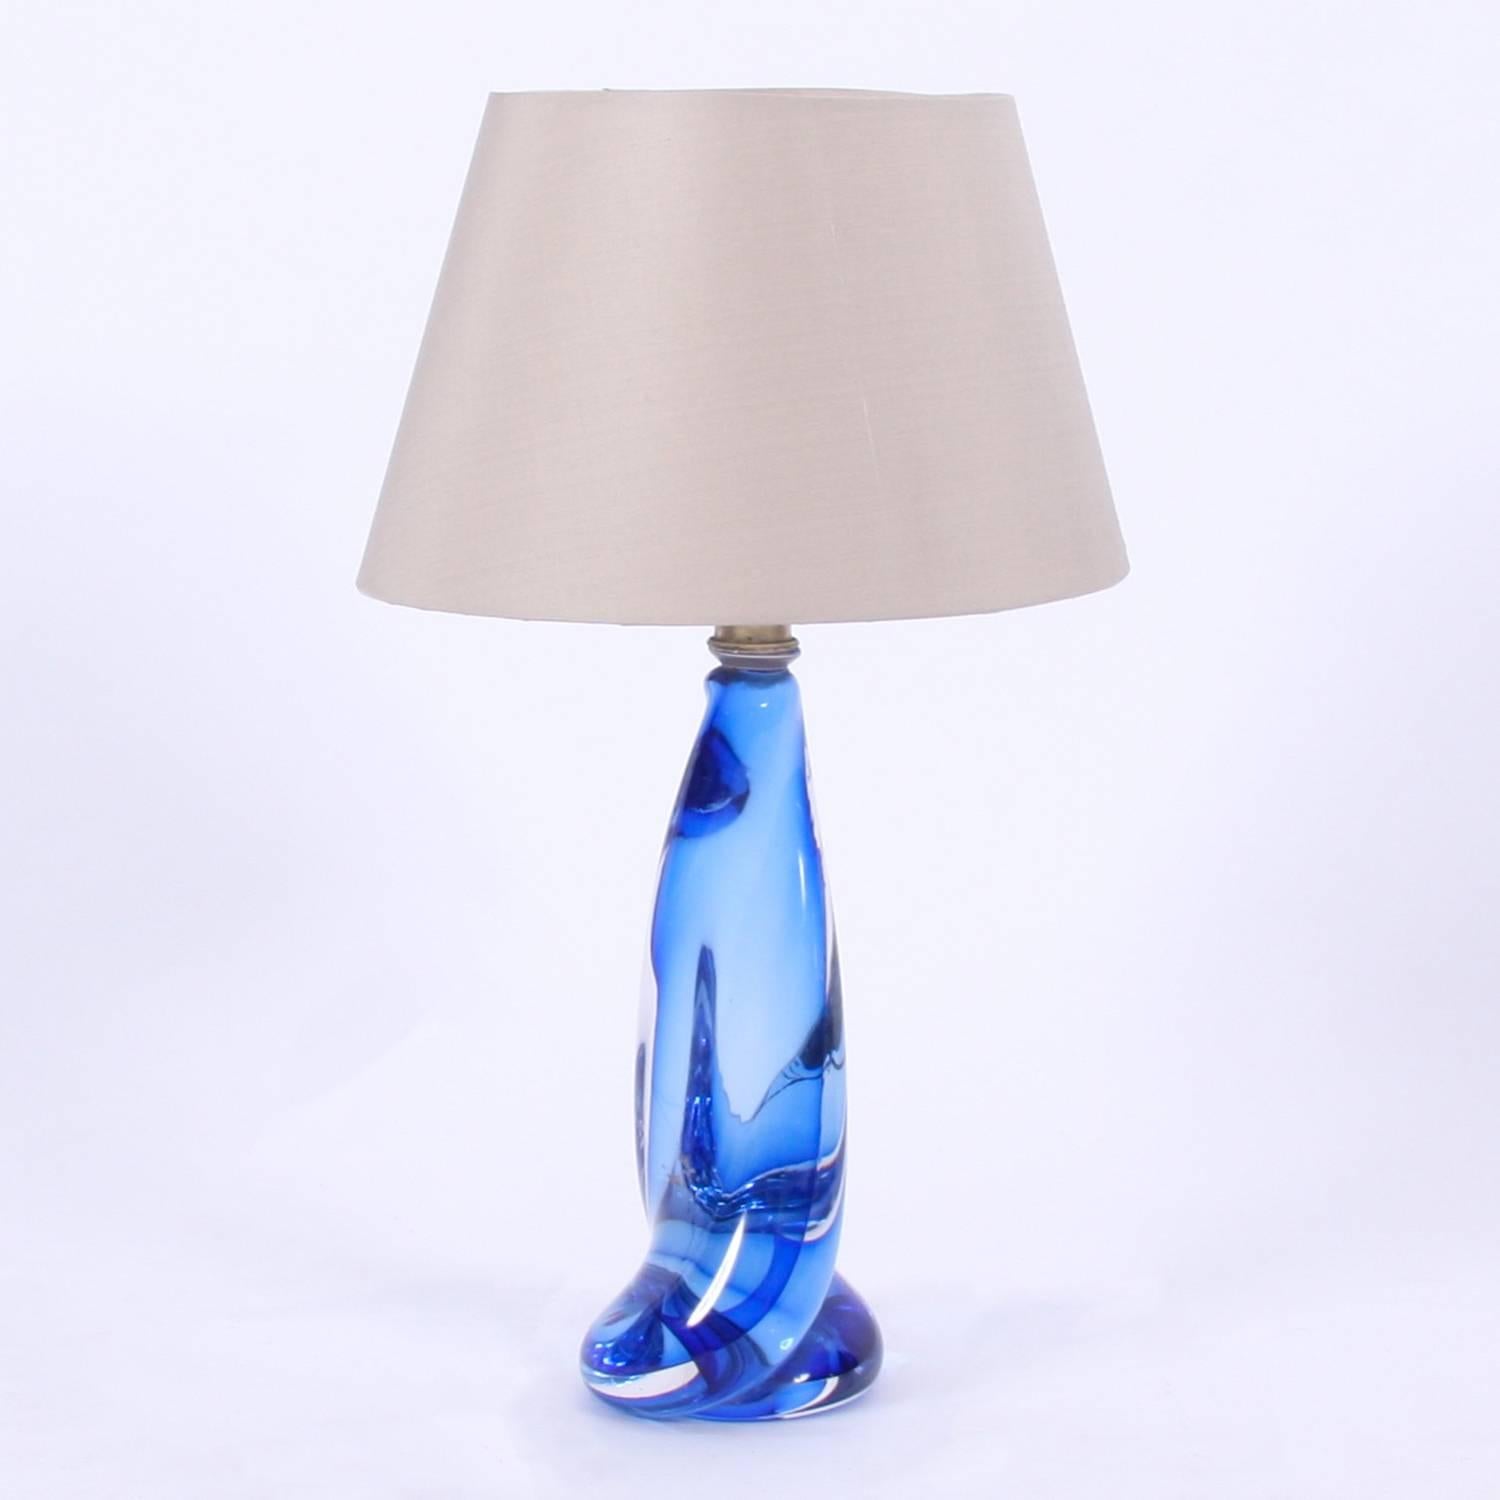 Belgian, circa 1960

A rare pair of Val Saint Lambert table lamps with twisted blue glass. 

Pictured with bespoke, handmade, silk shades. Rewired and PAT tested.